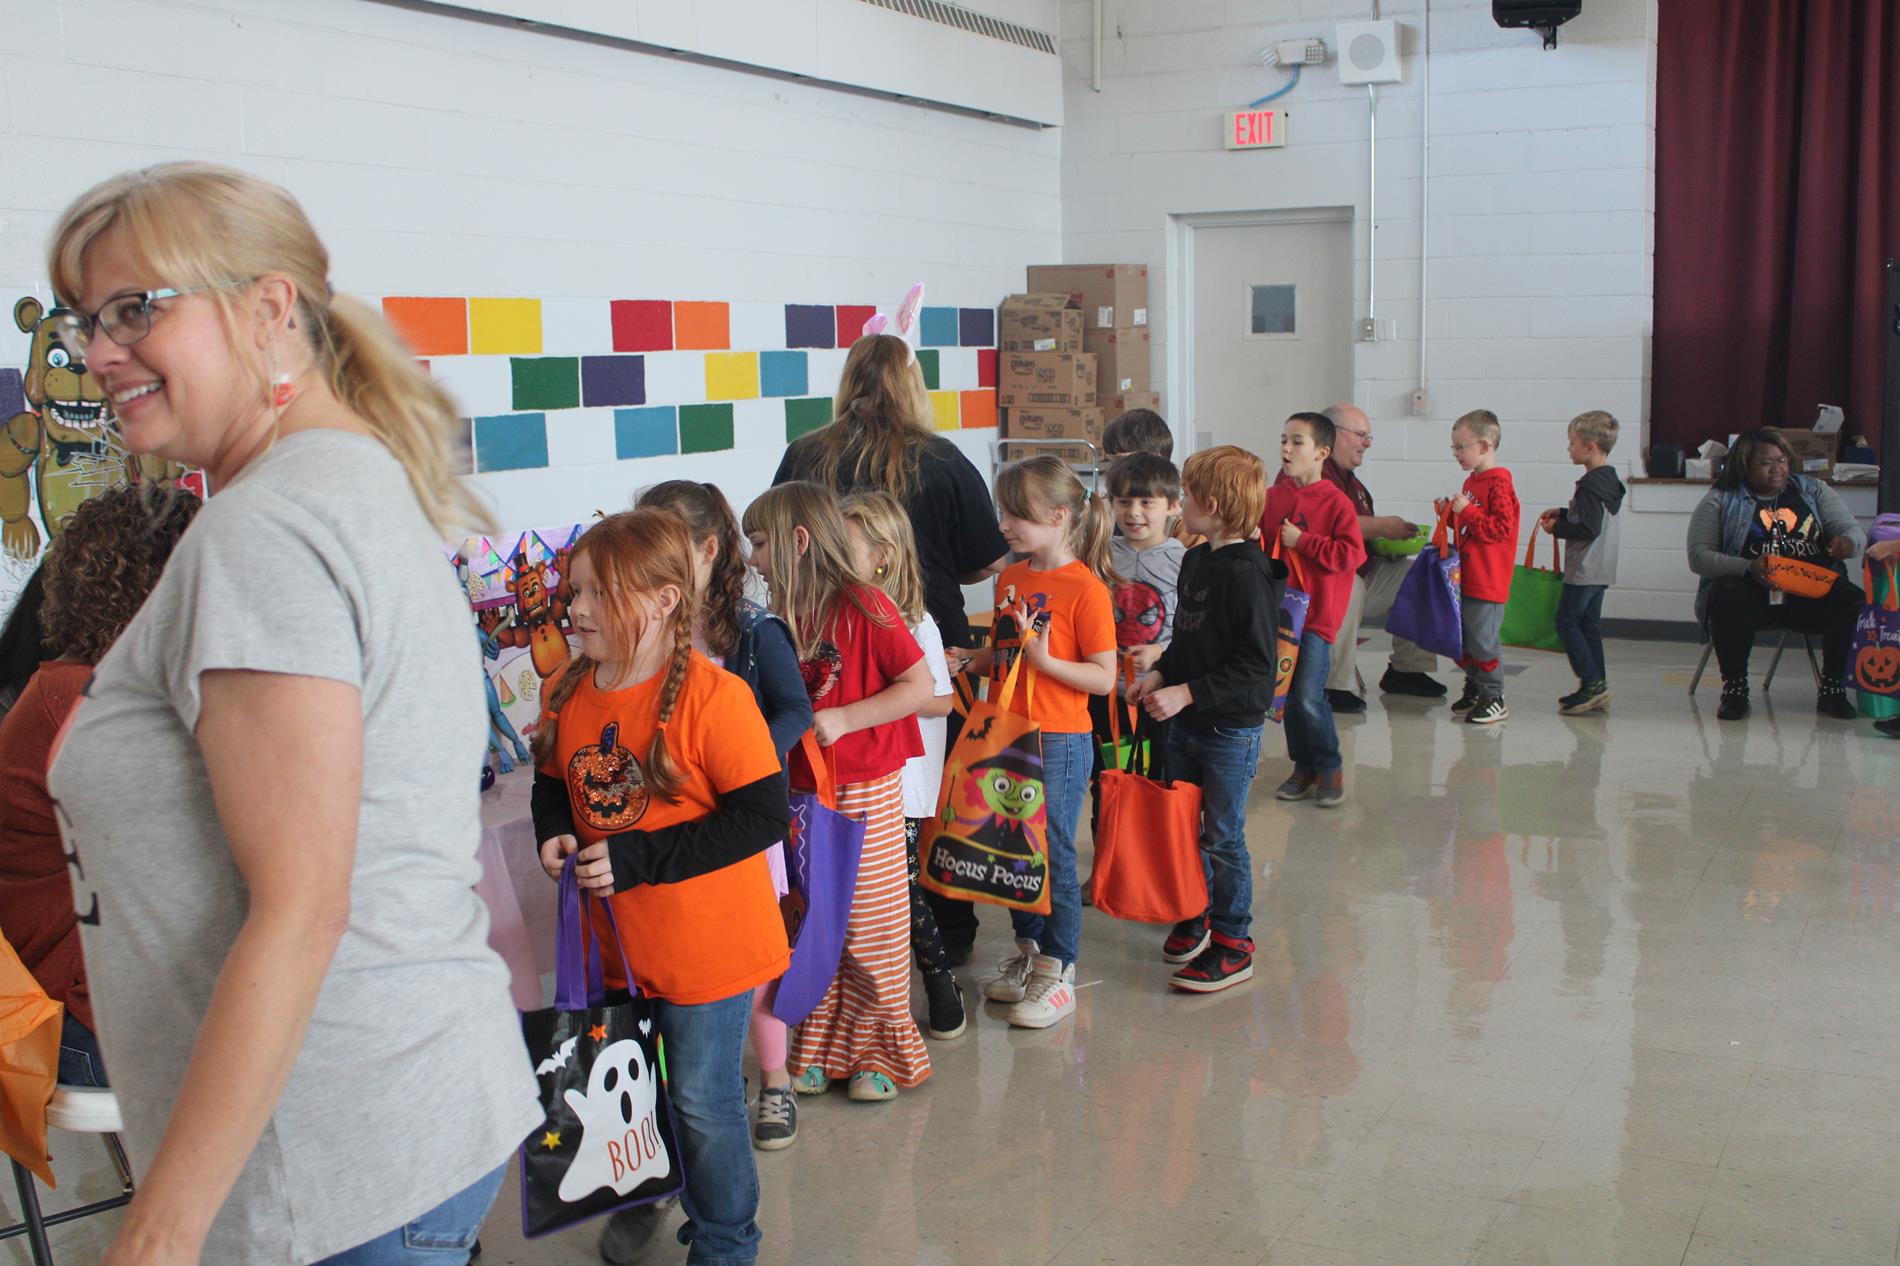 students lined up to trunk or treat in cafeteria at primary school